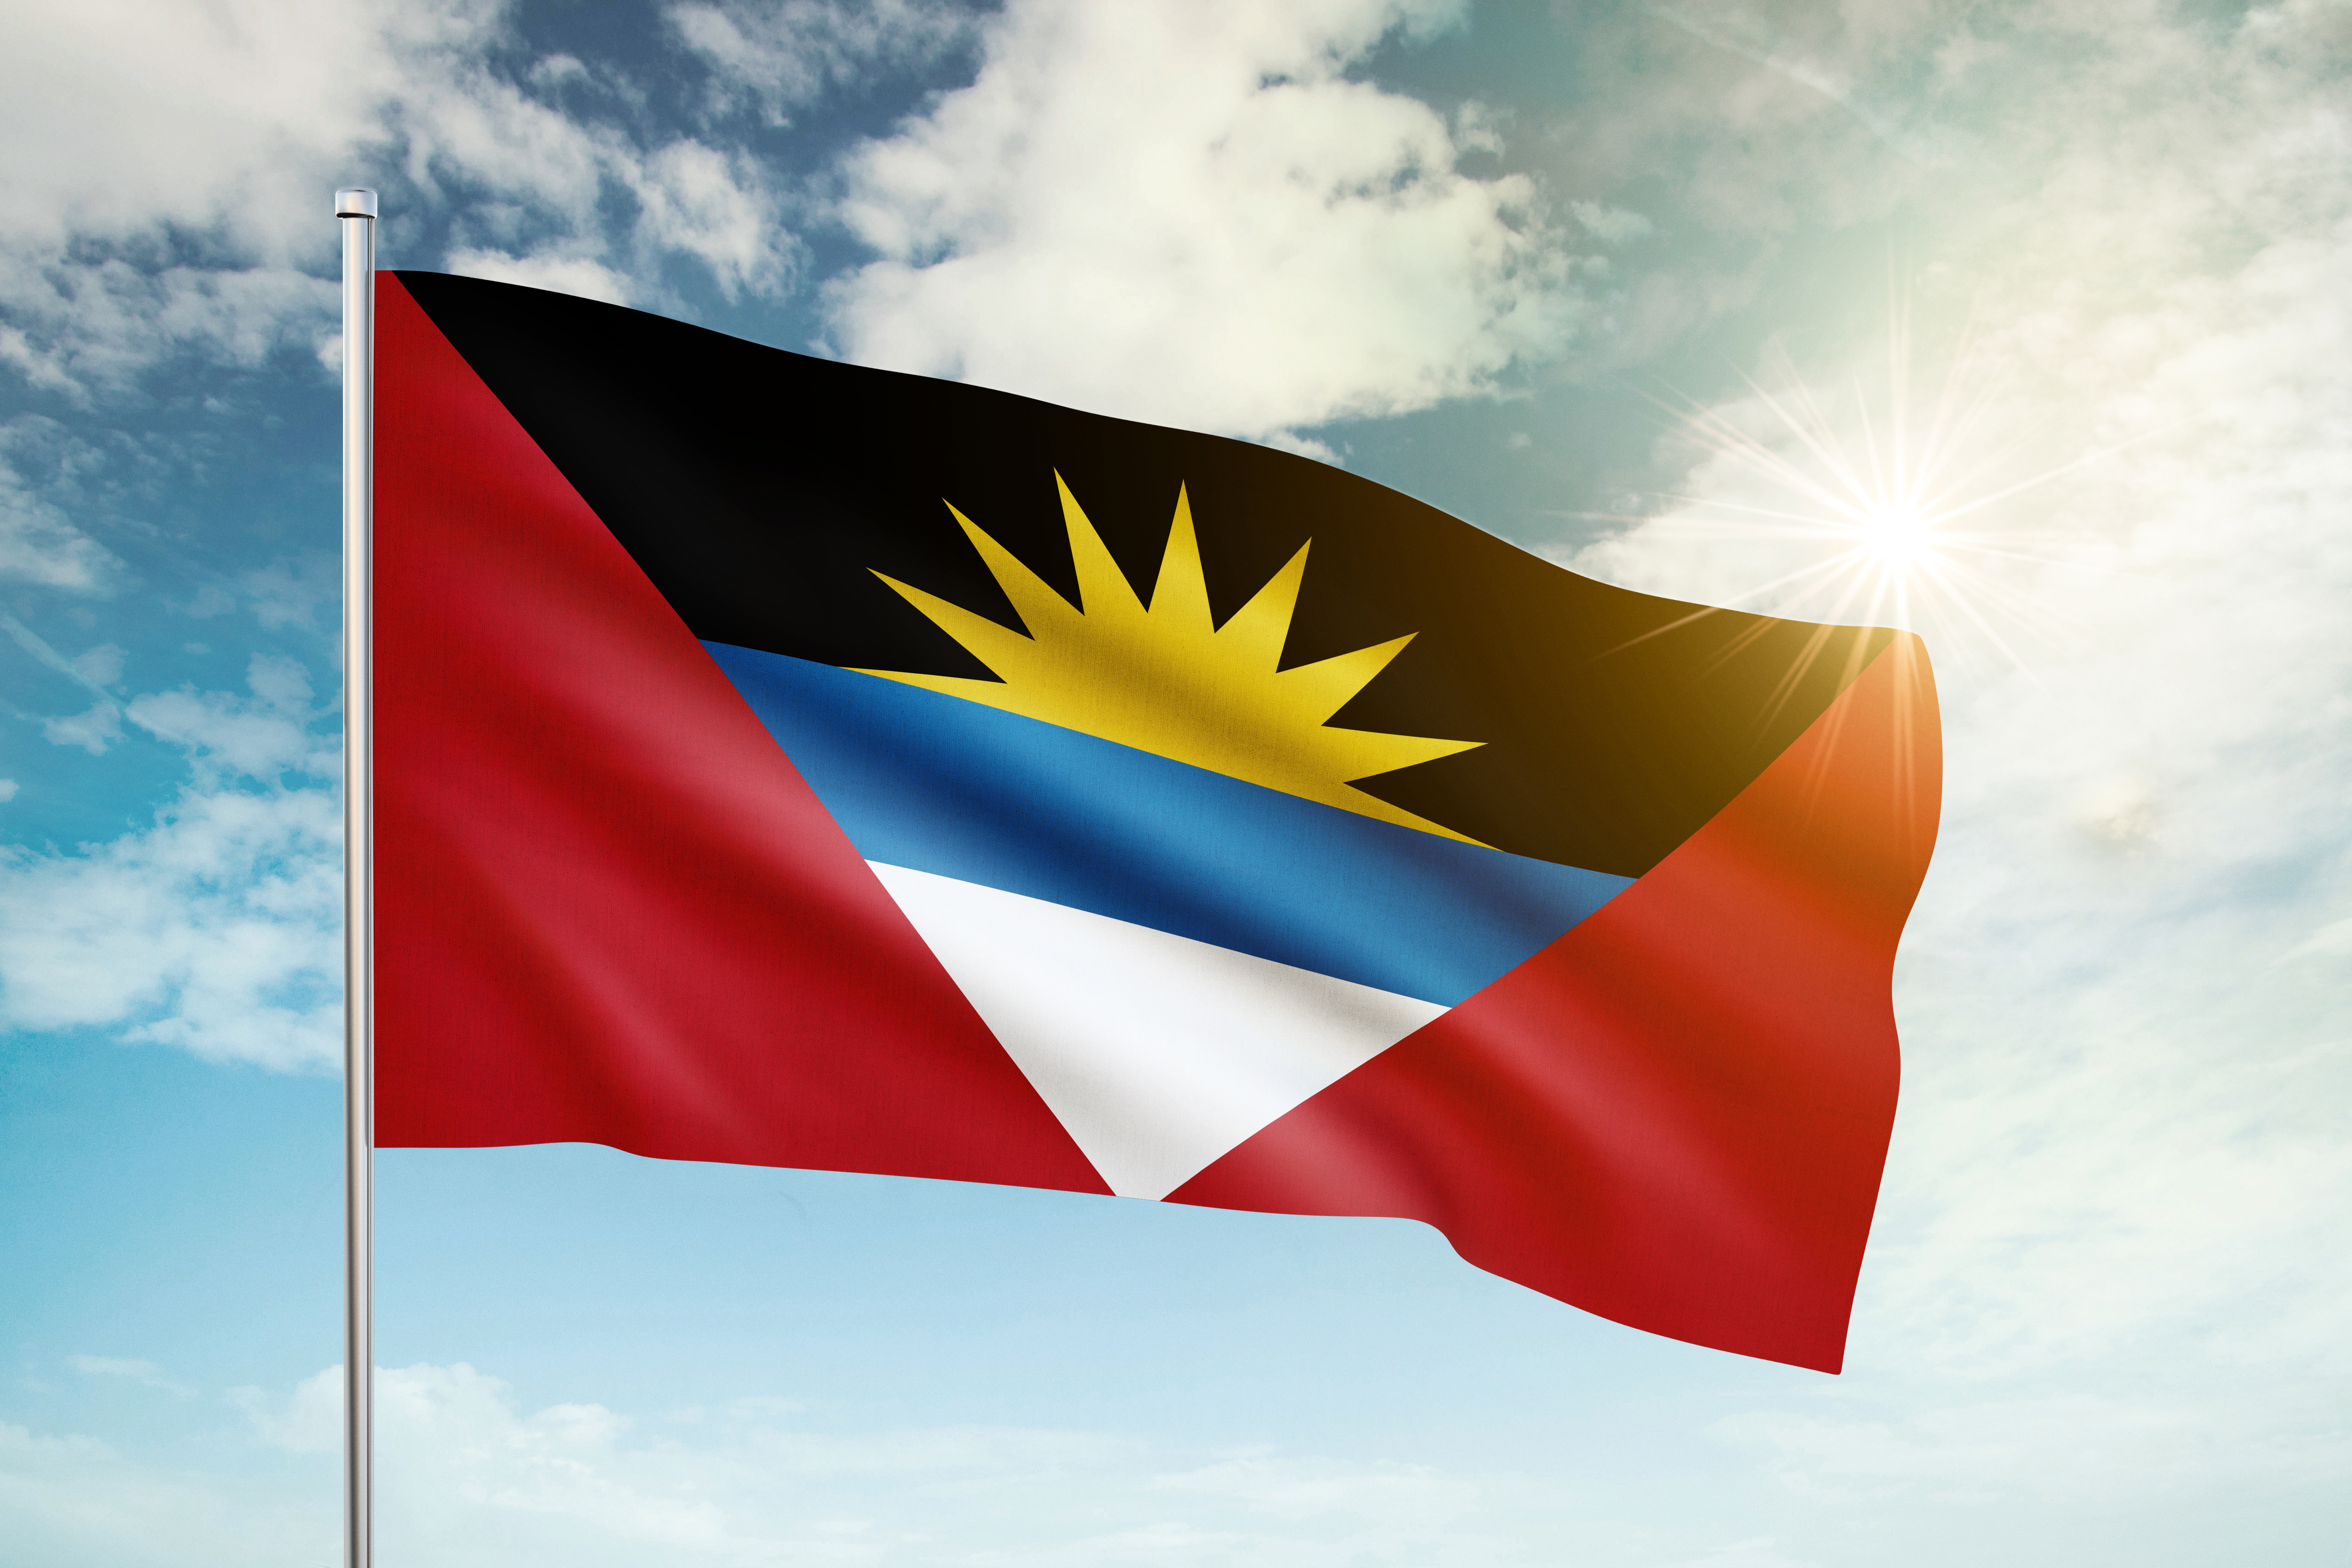 Flag of Antigua and Barbuda, which symbolizes the citizenship of the Caribbean islands